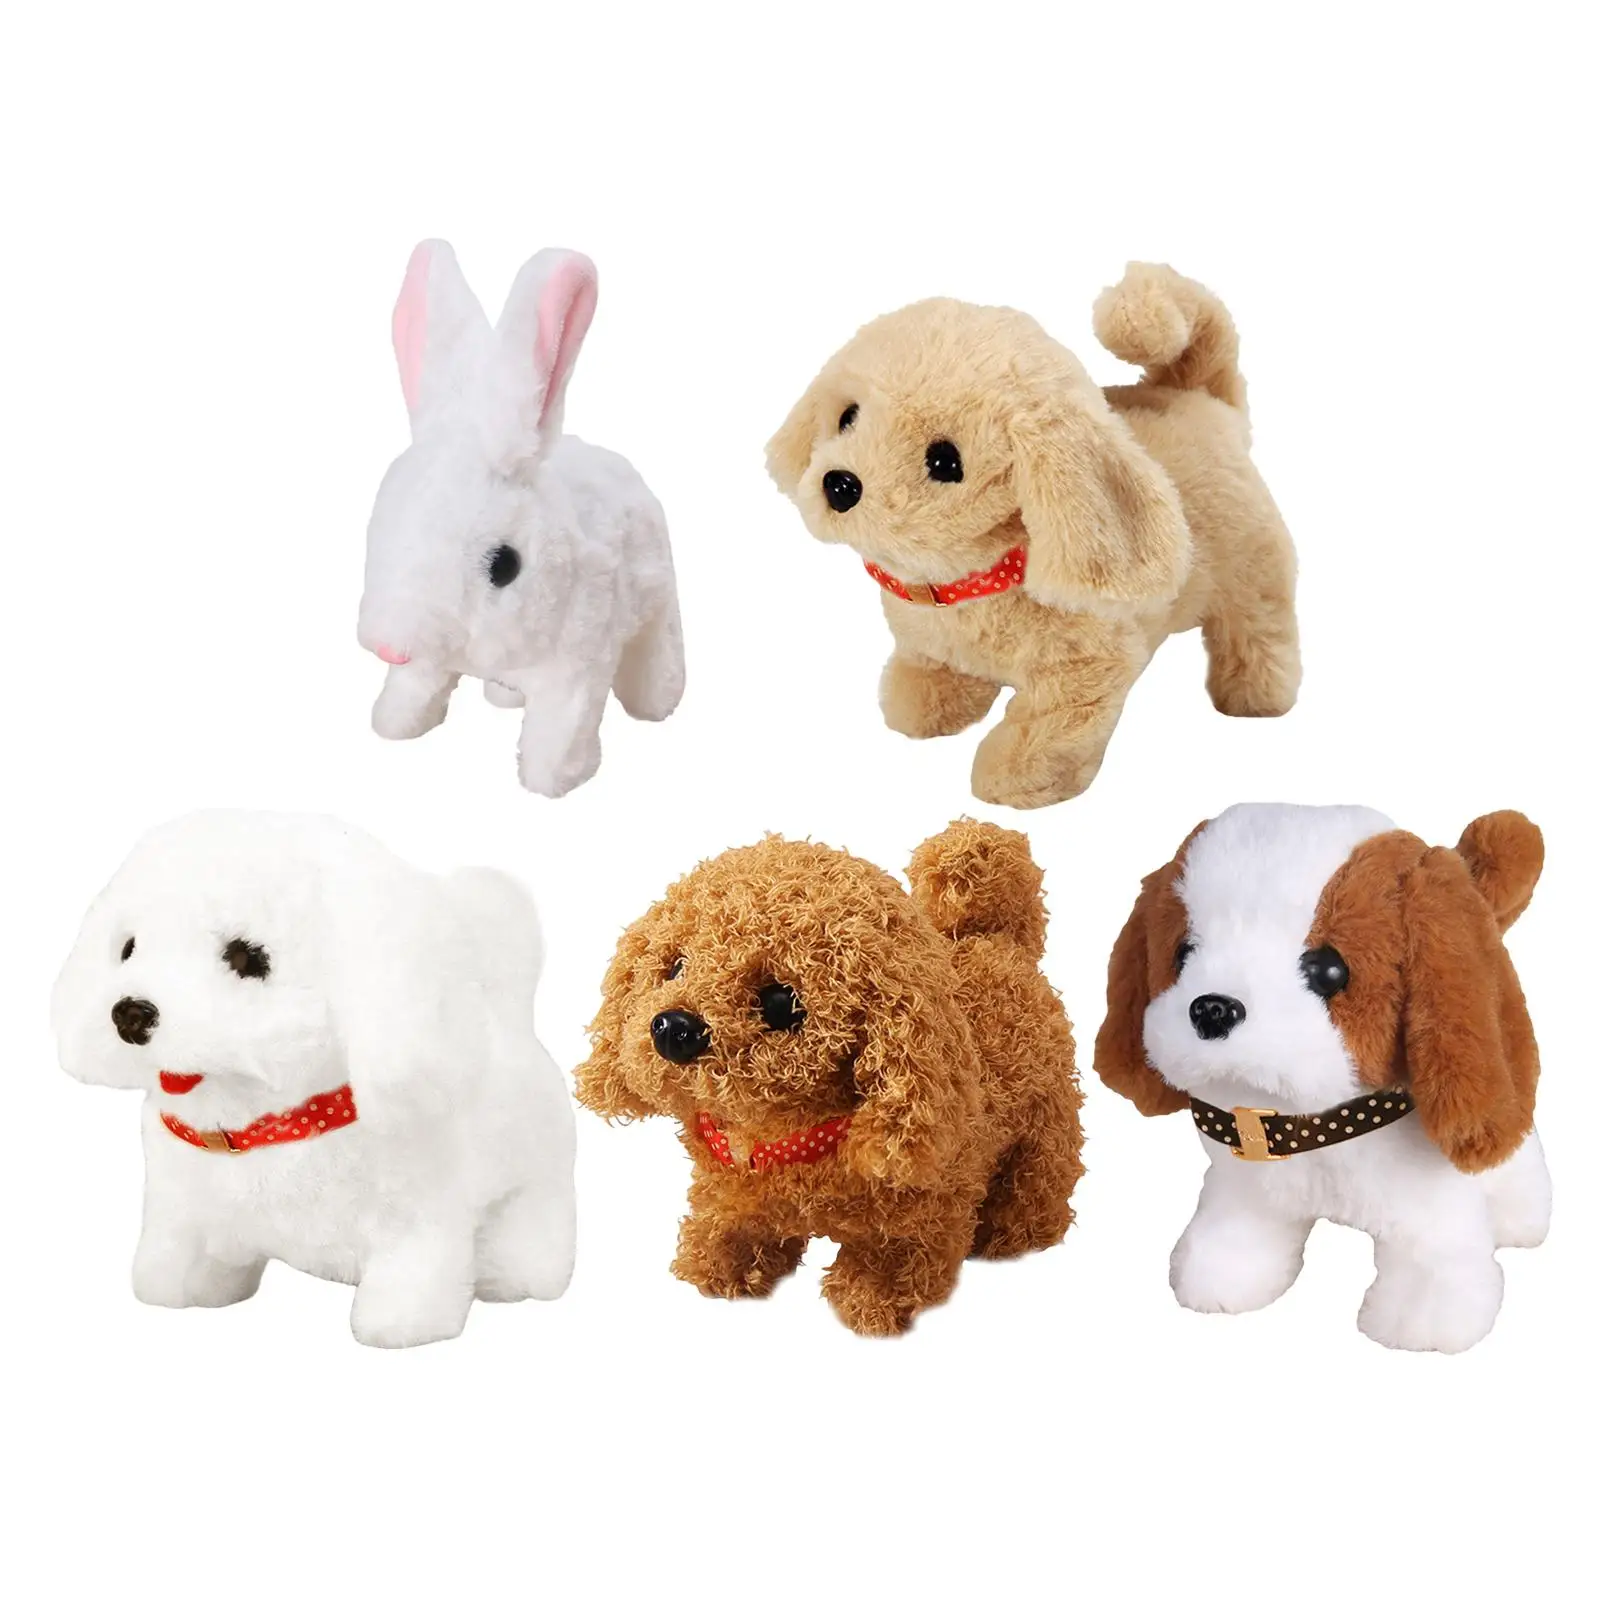 Simulation Electric Plush Toy Tail Wagging Interesting Toy with Sound Toy Stuffed Animal Plush Toy for Girls Children Gifts